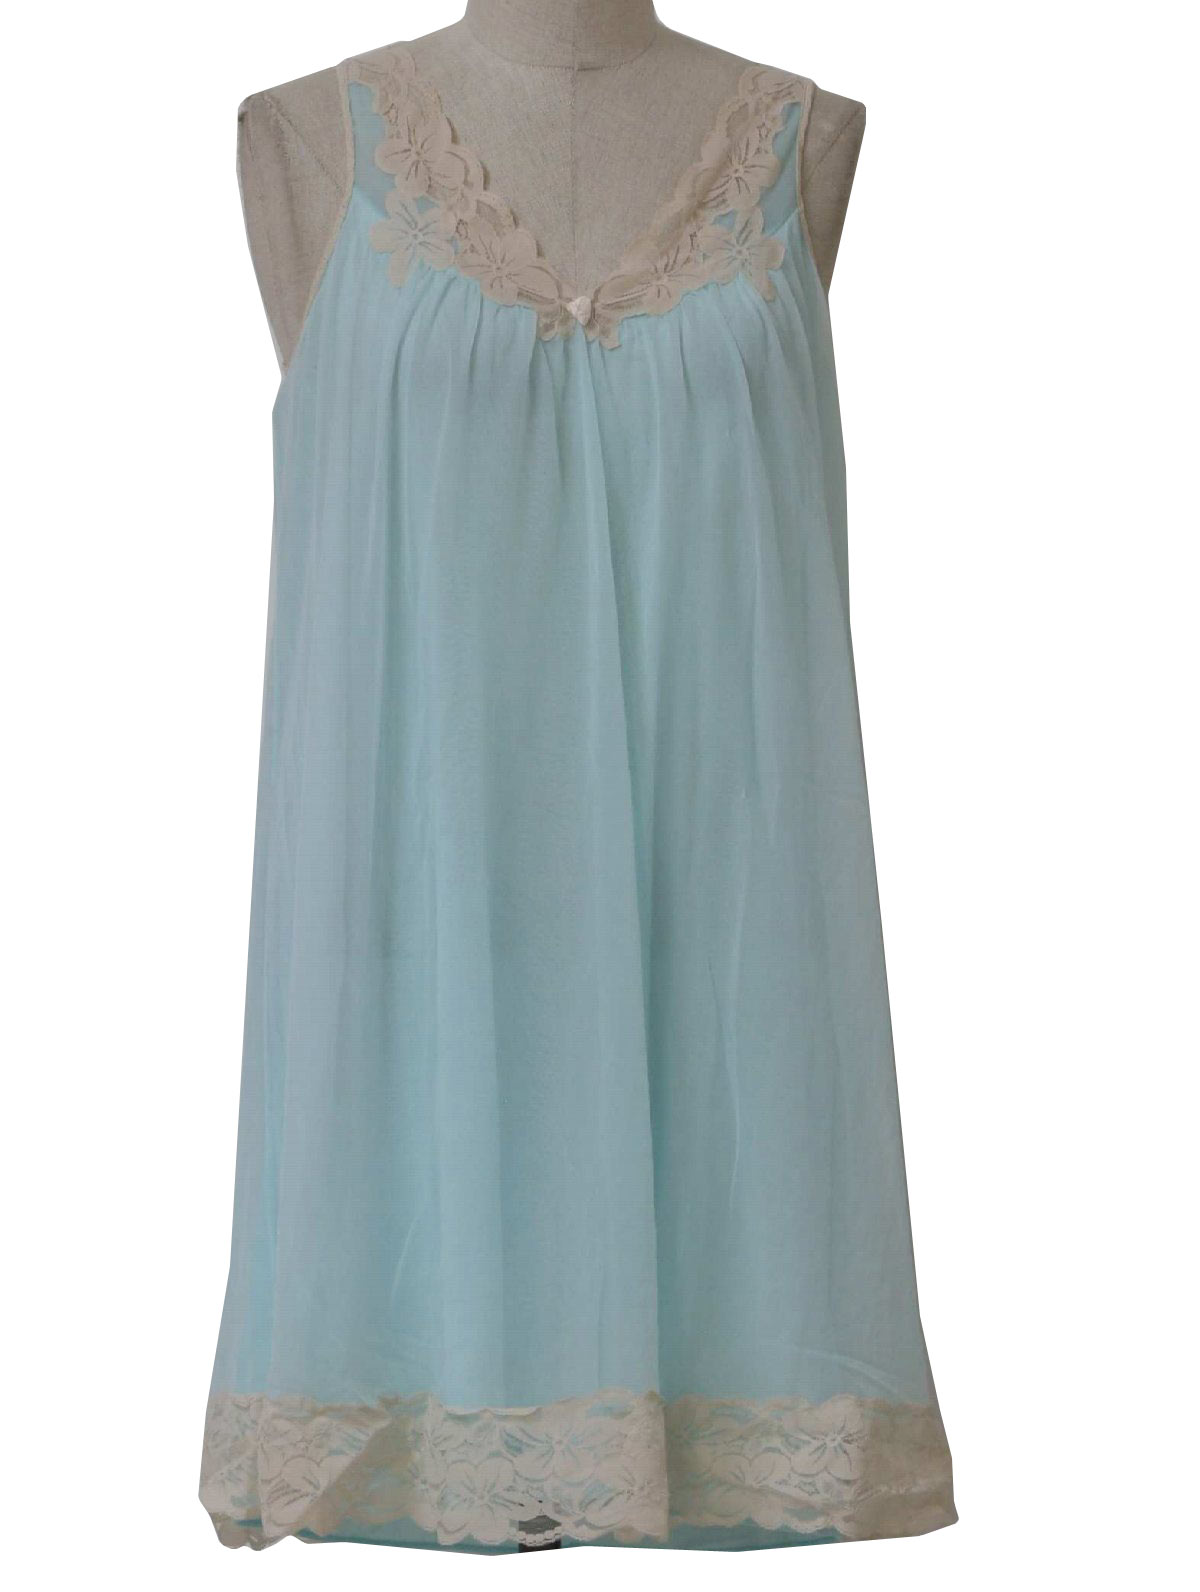 1970s Vintage Womens Lingerie Nightgown: 70s -Kayser- Womens teal blue ...